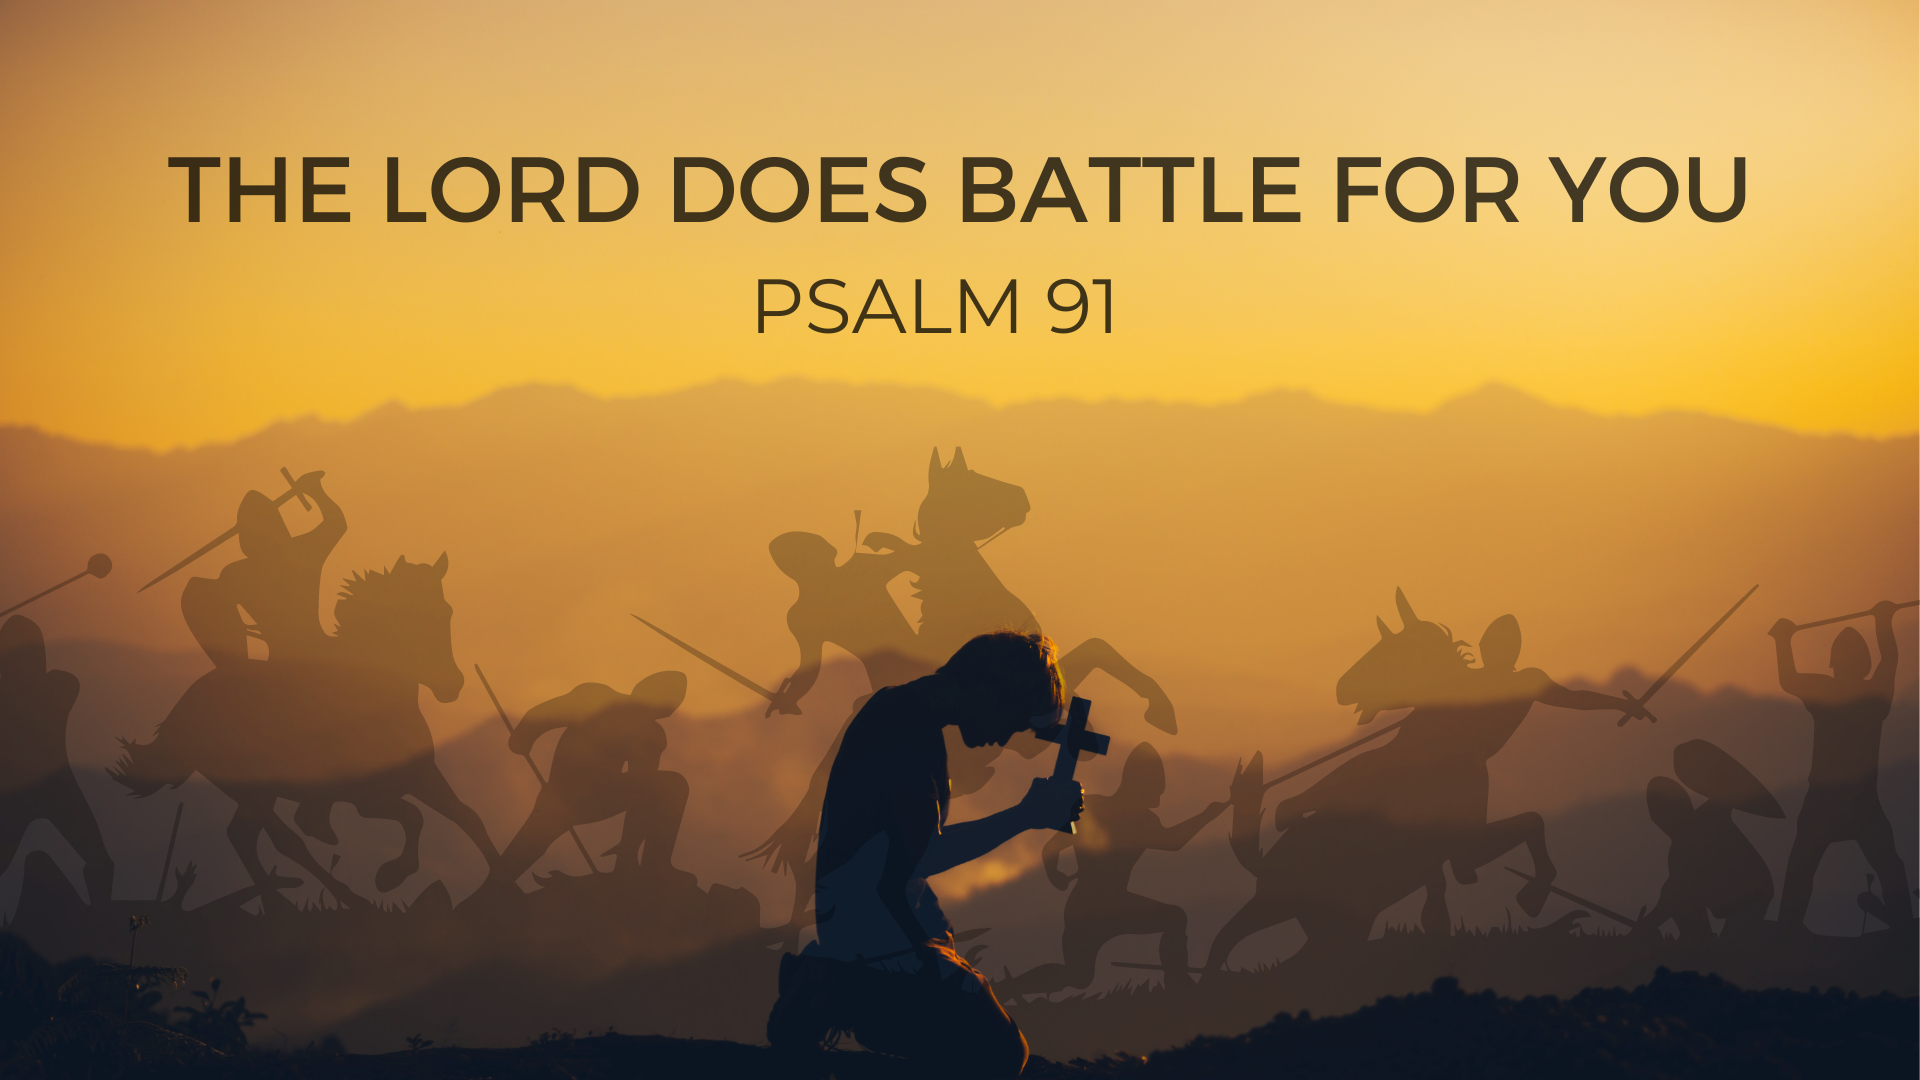 The Lord does battle for you